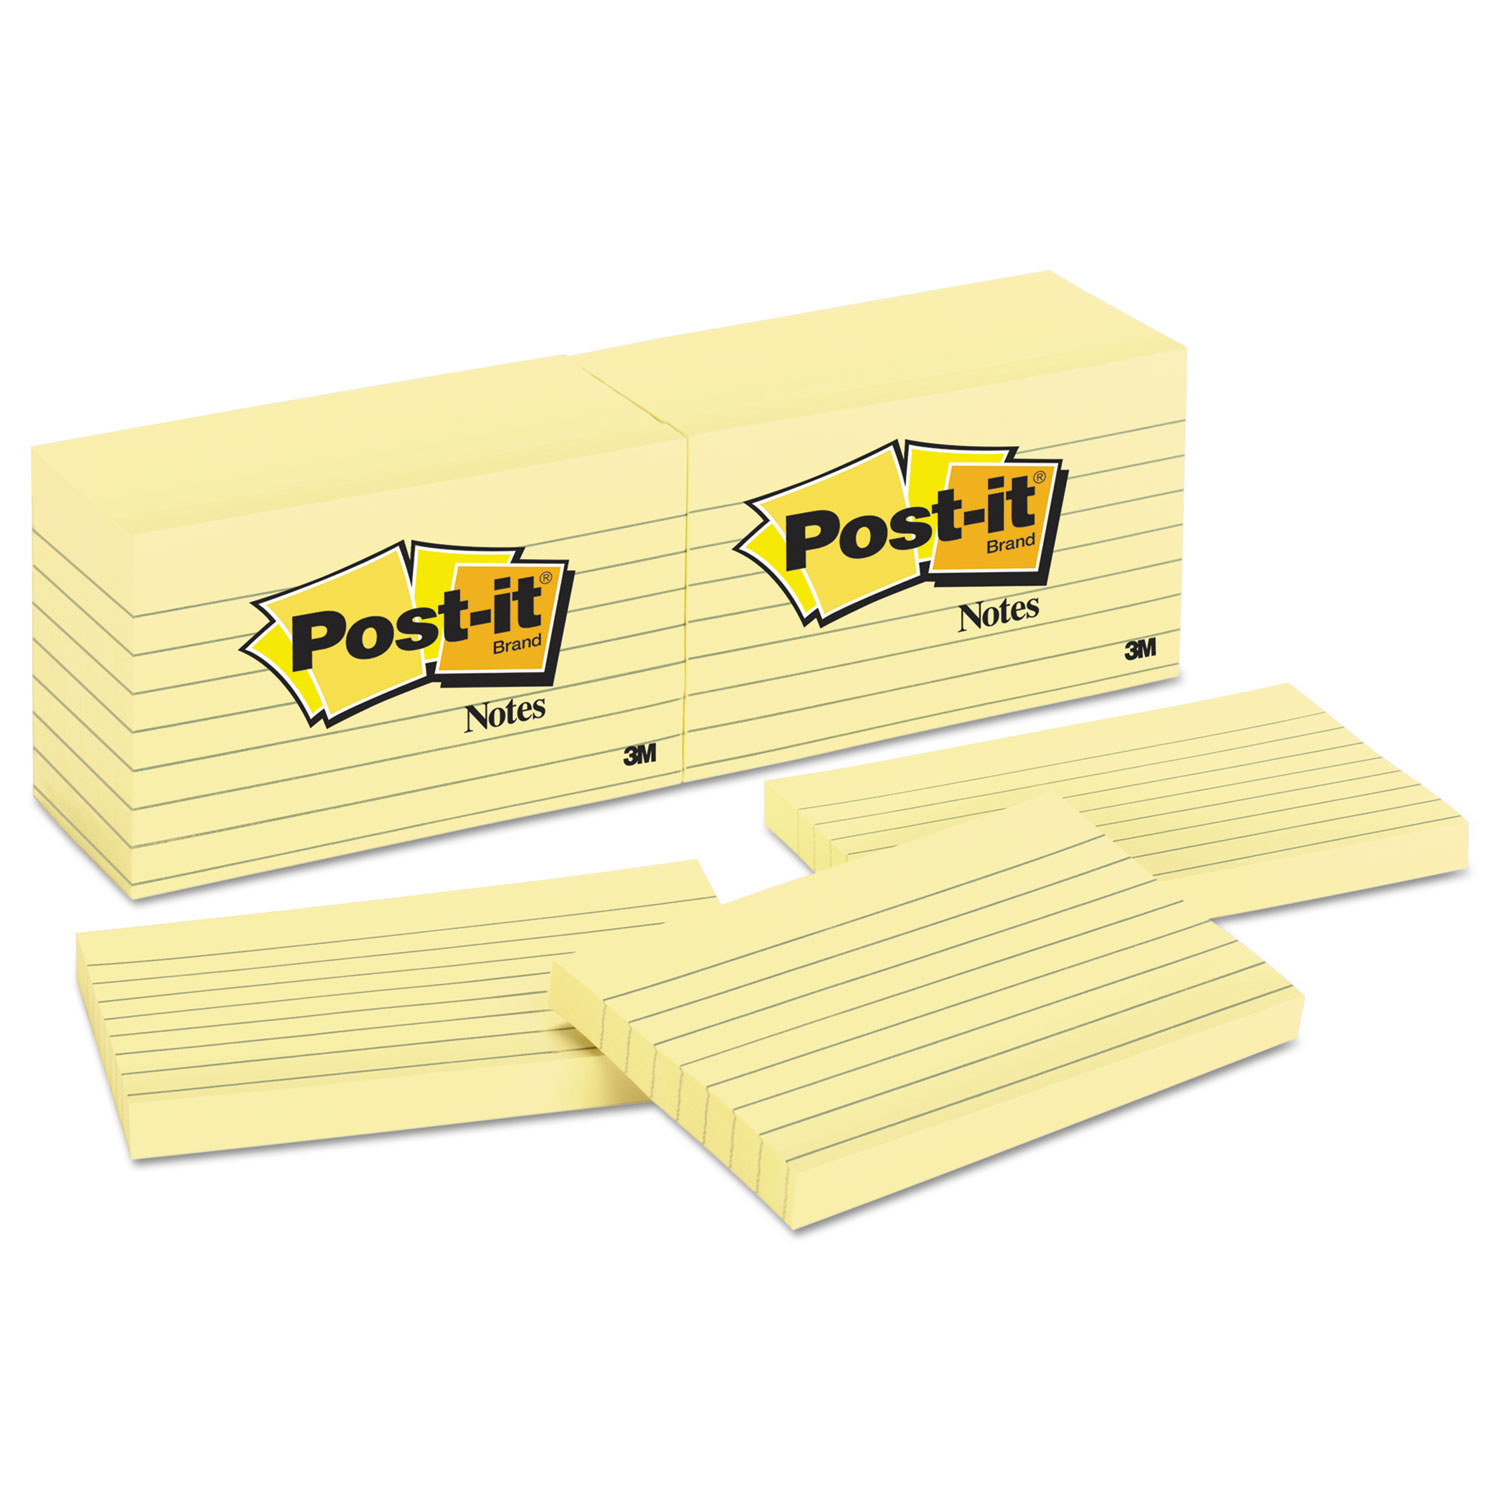  Post-it Notes 635 Original Pads in Canary Yellow, 3 x 5, Lined, 100-Sheet, 12/Pack (MMM635YW) 